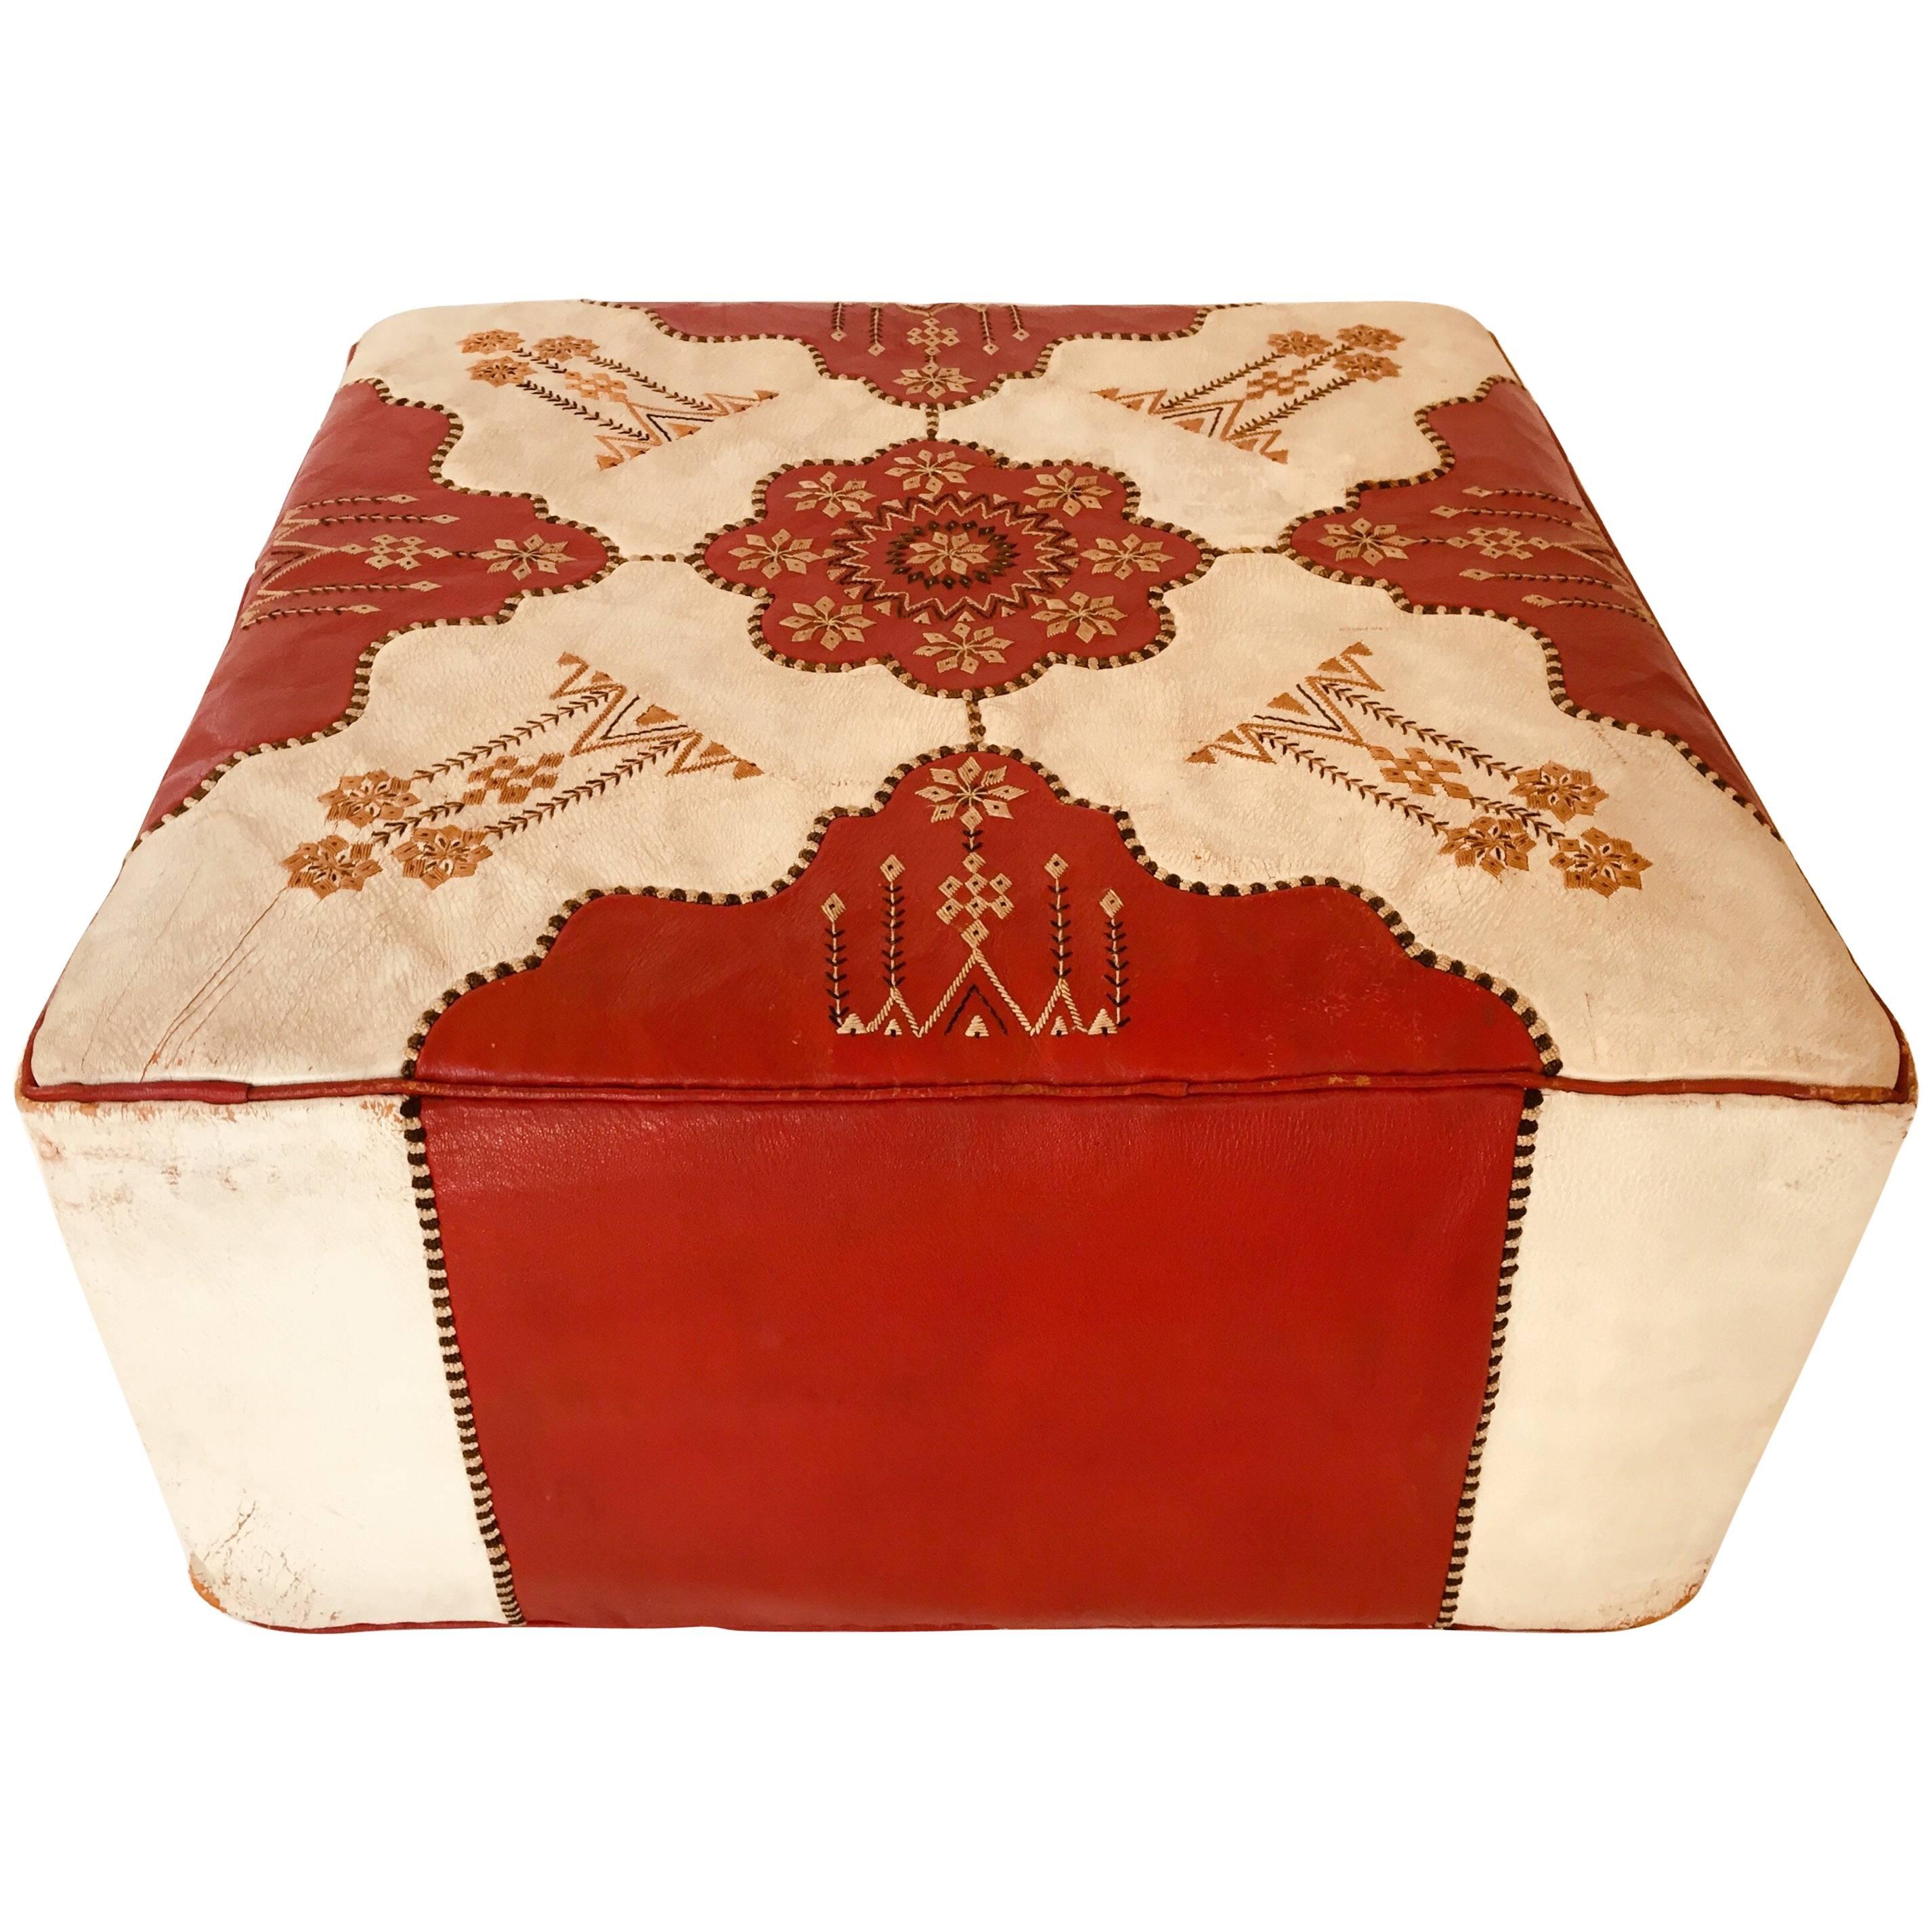 Large Vintage Moroccan Red and White Leather Rectangular Ottoman